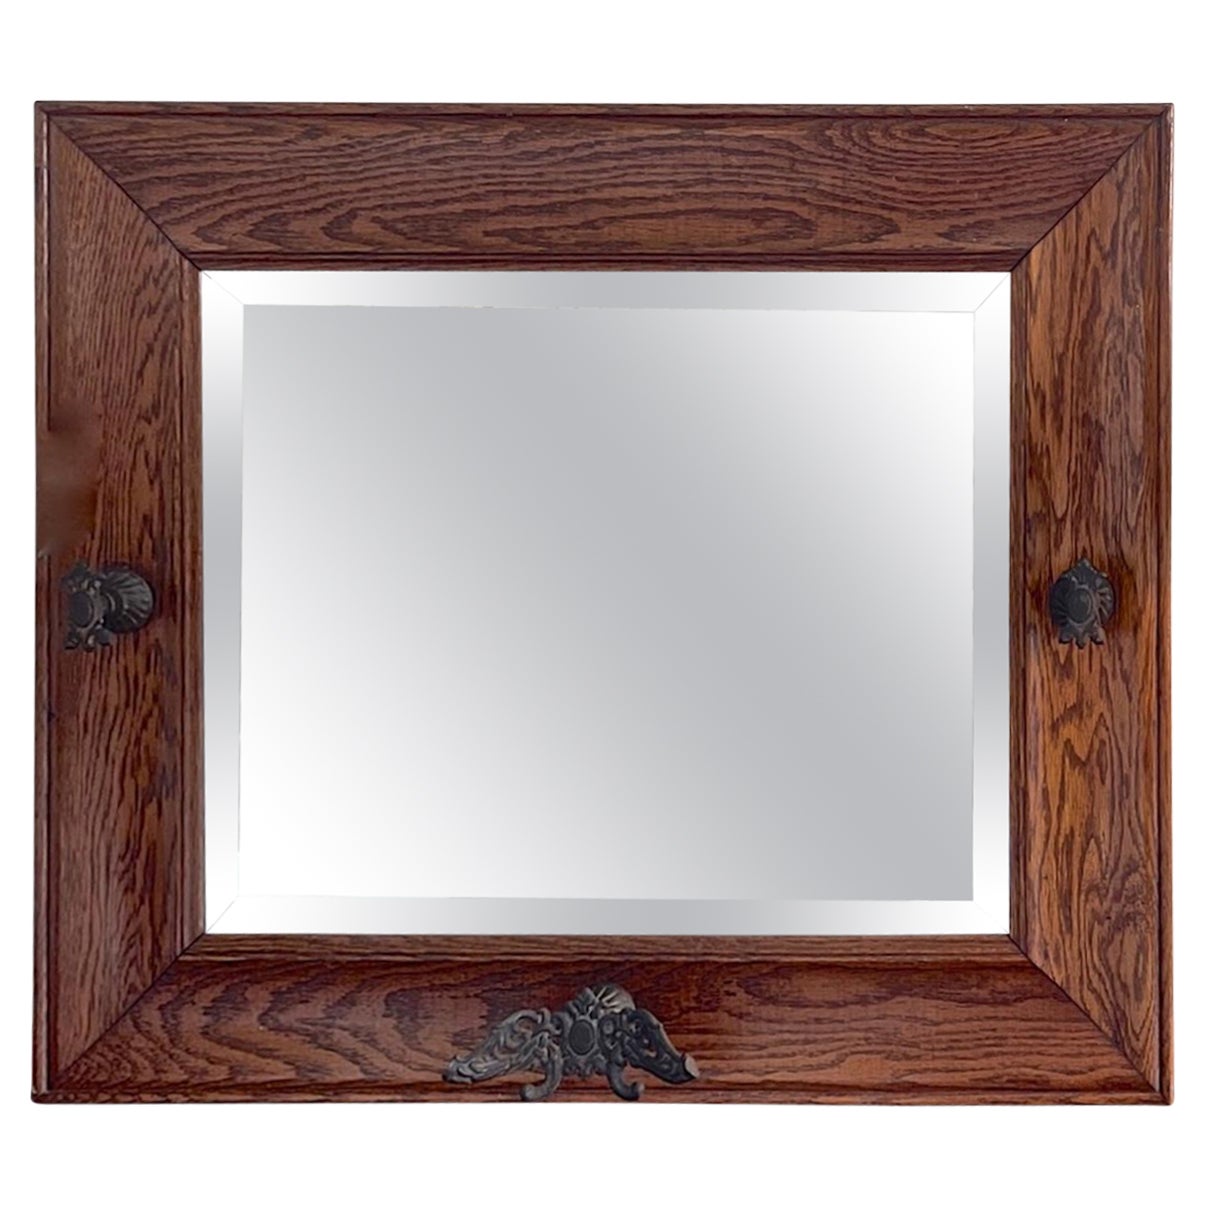 English 19th Century Stained Oak Framed Mirror with Beveled Glass